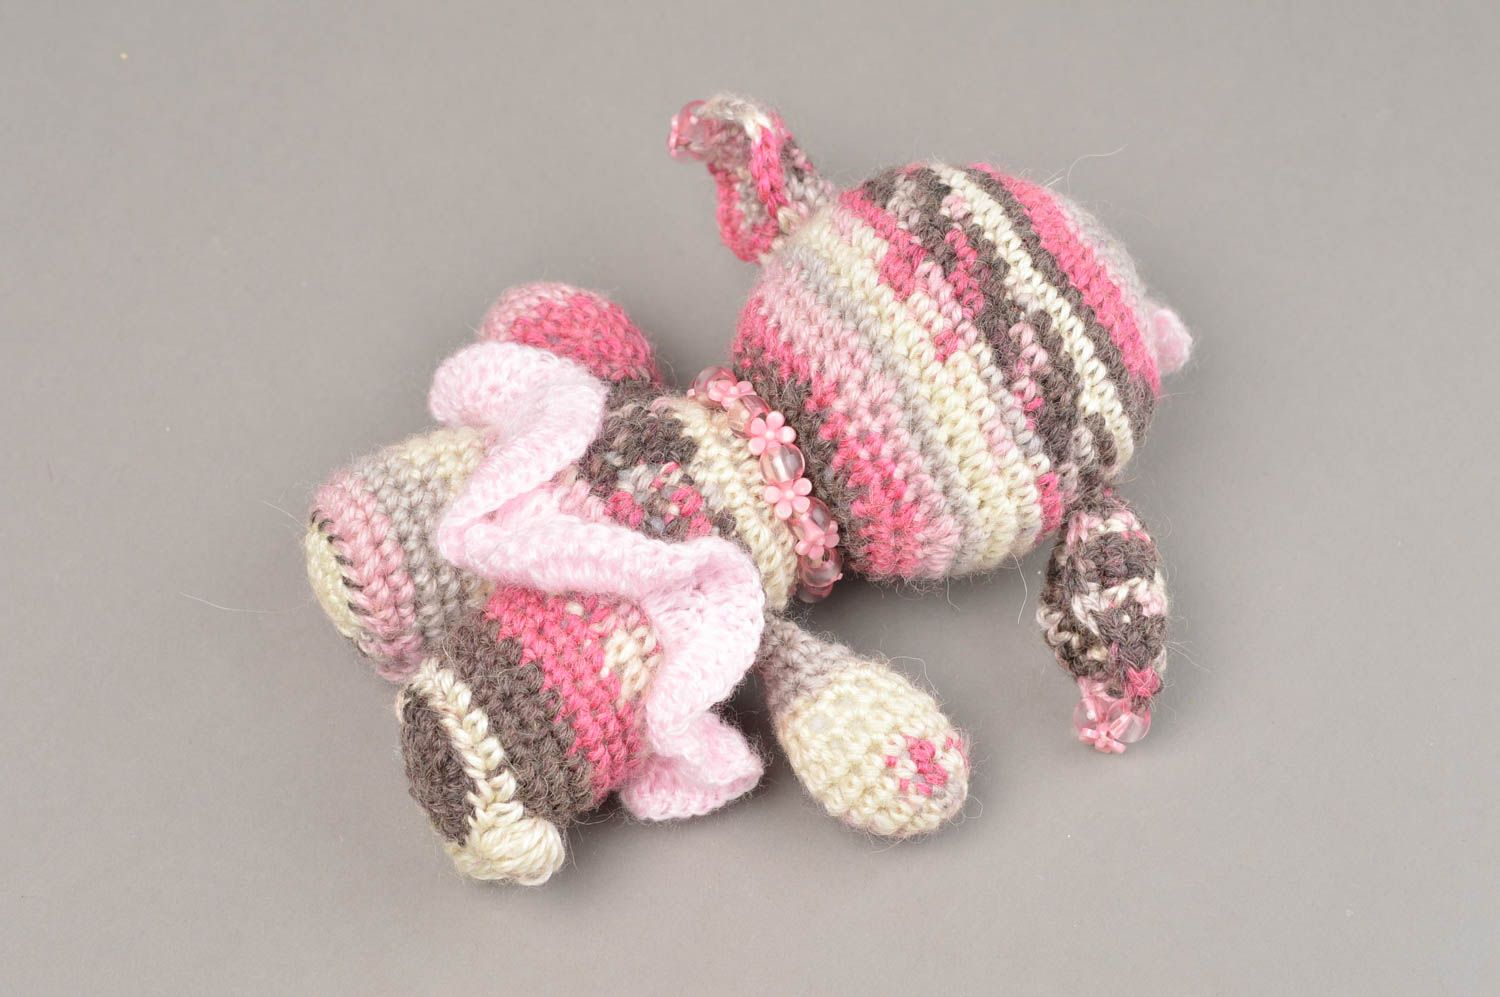 Handmade pink soft toy crocheted beautiful souvenir unusual present for kids photo 3